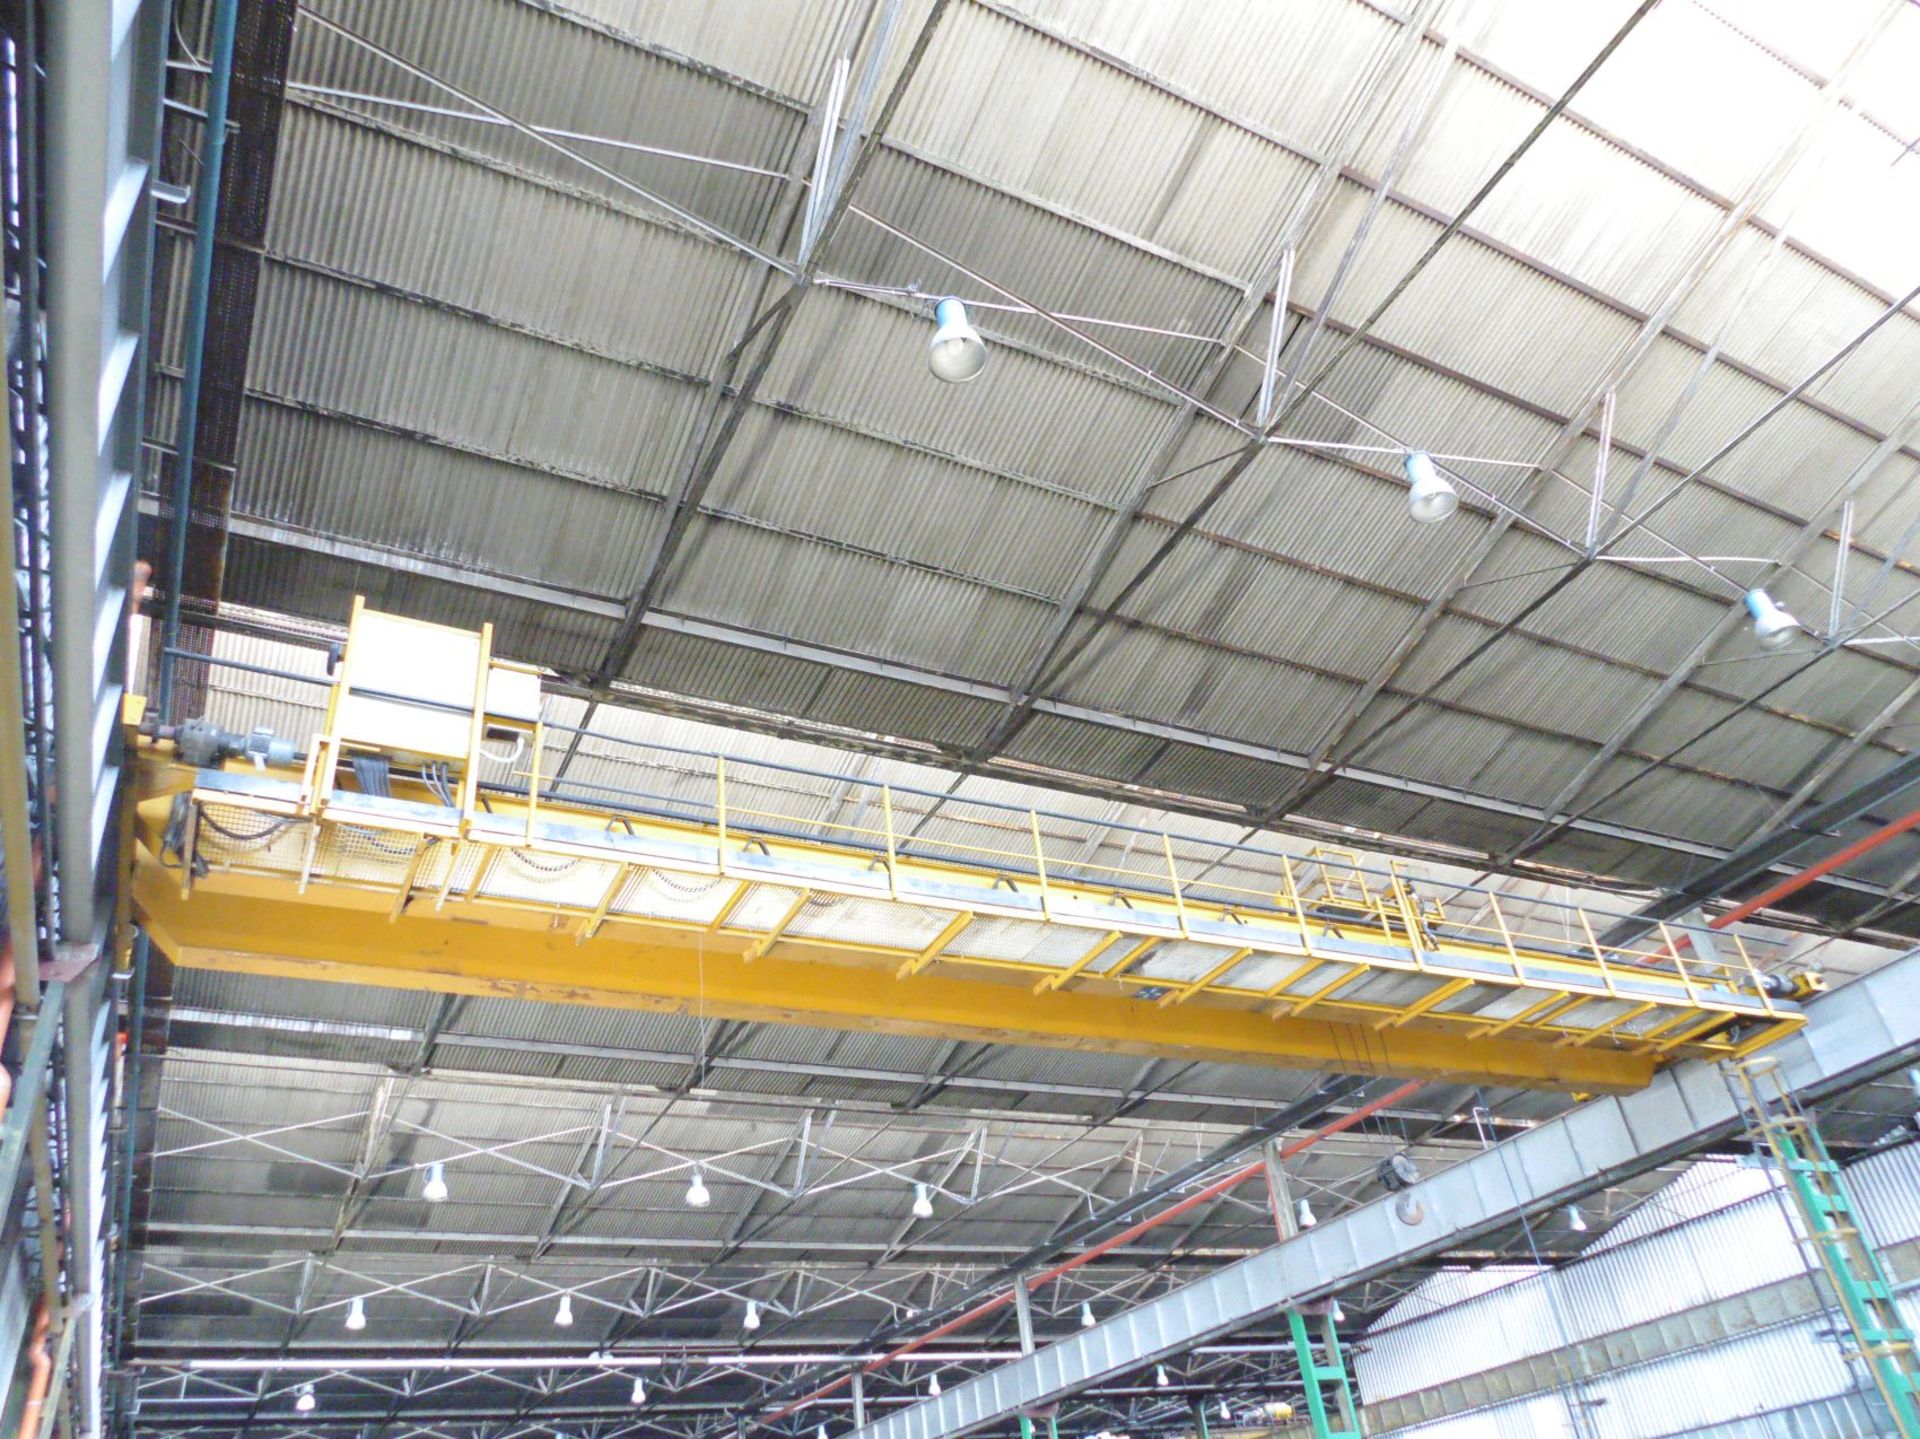 Twin Beam Overhead Travelling Gantry Crane; make and capacity unknown; span 19m, believed to be 20